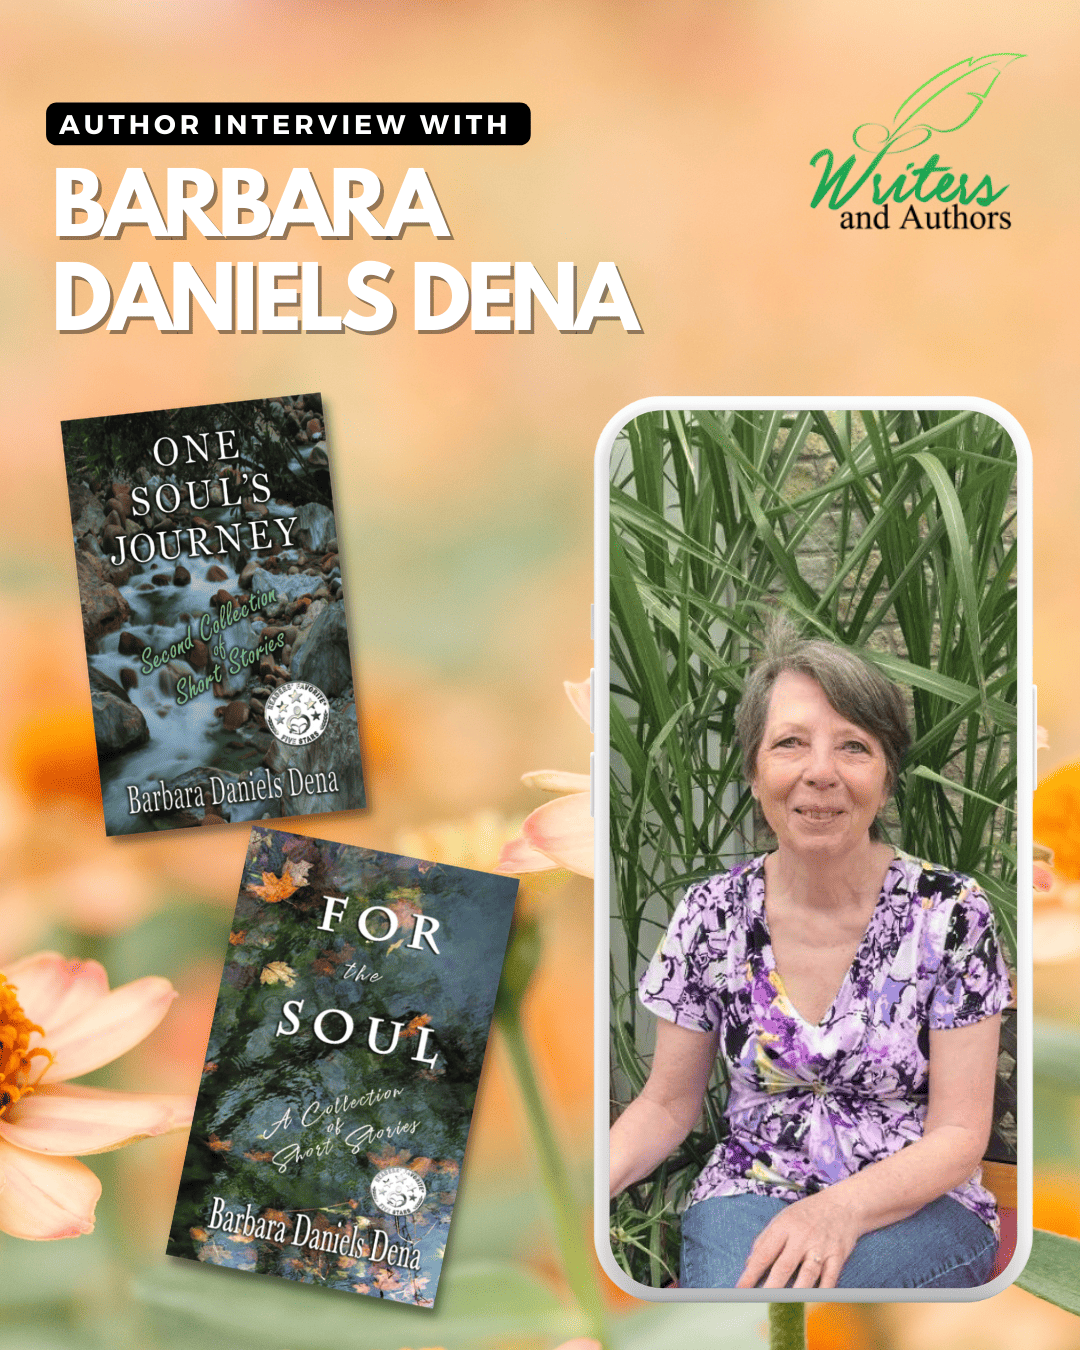 Author Interview with Barbara Daniels Dena | Writers and Authors - Book  Reviews, Book Tours and Author interviews